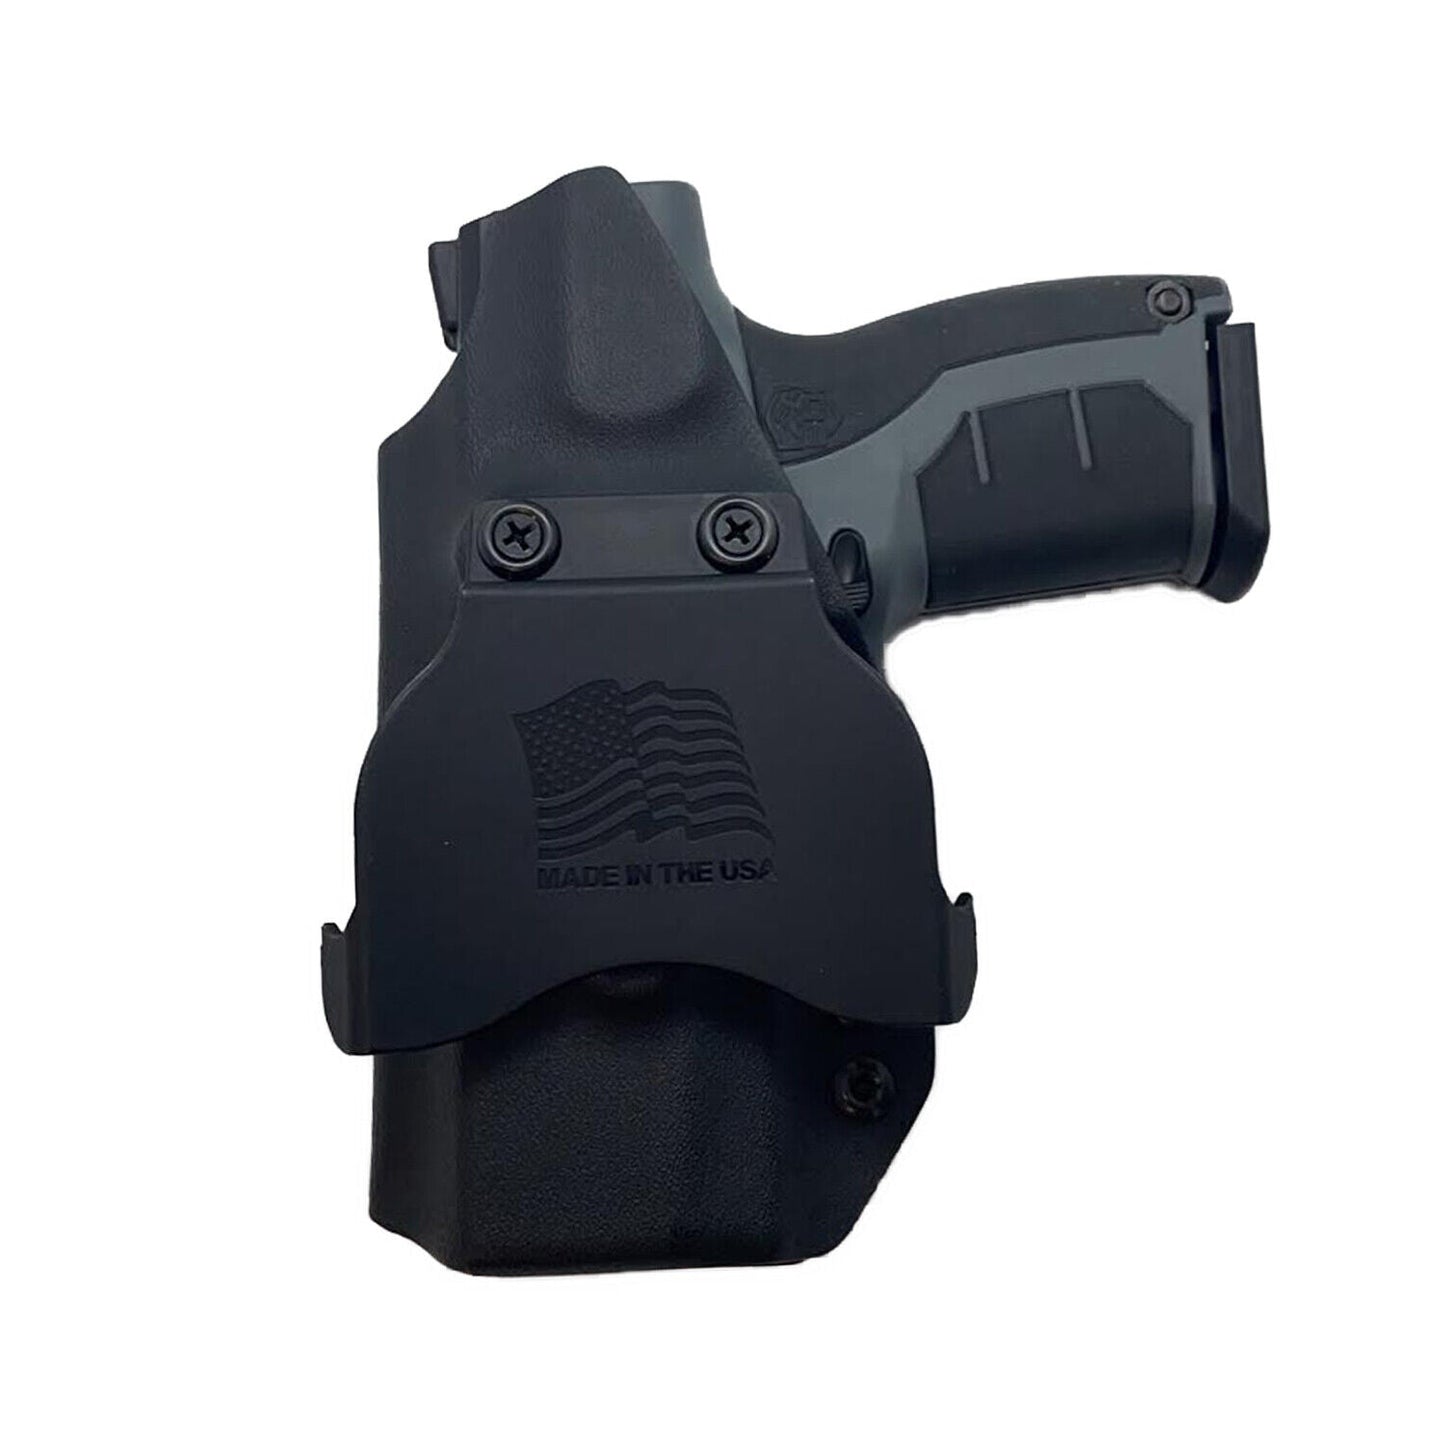 BYRNA HD/ SD With TLR7/ TLR7A Light (Interchangeable IWB/OWB Orientation)